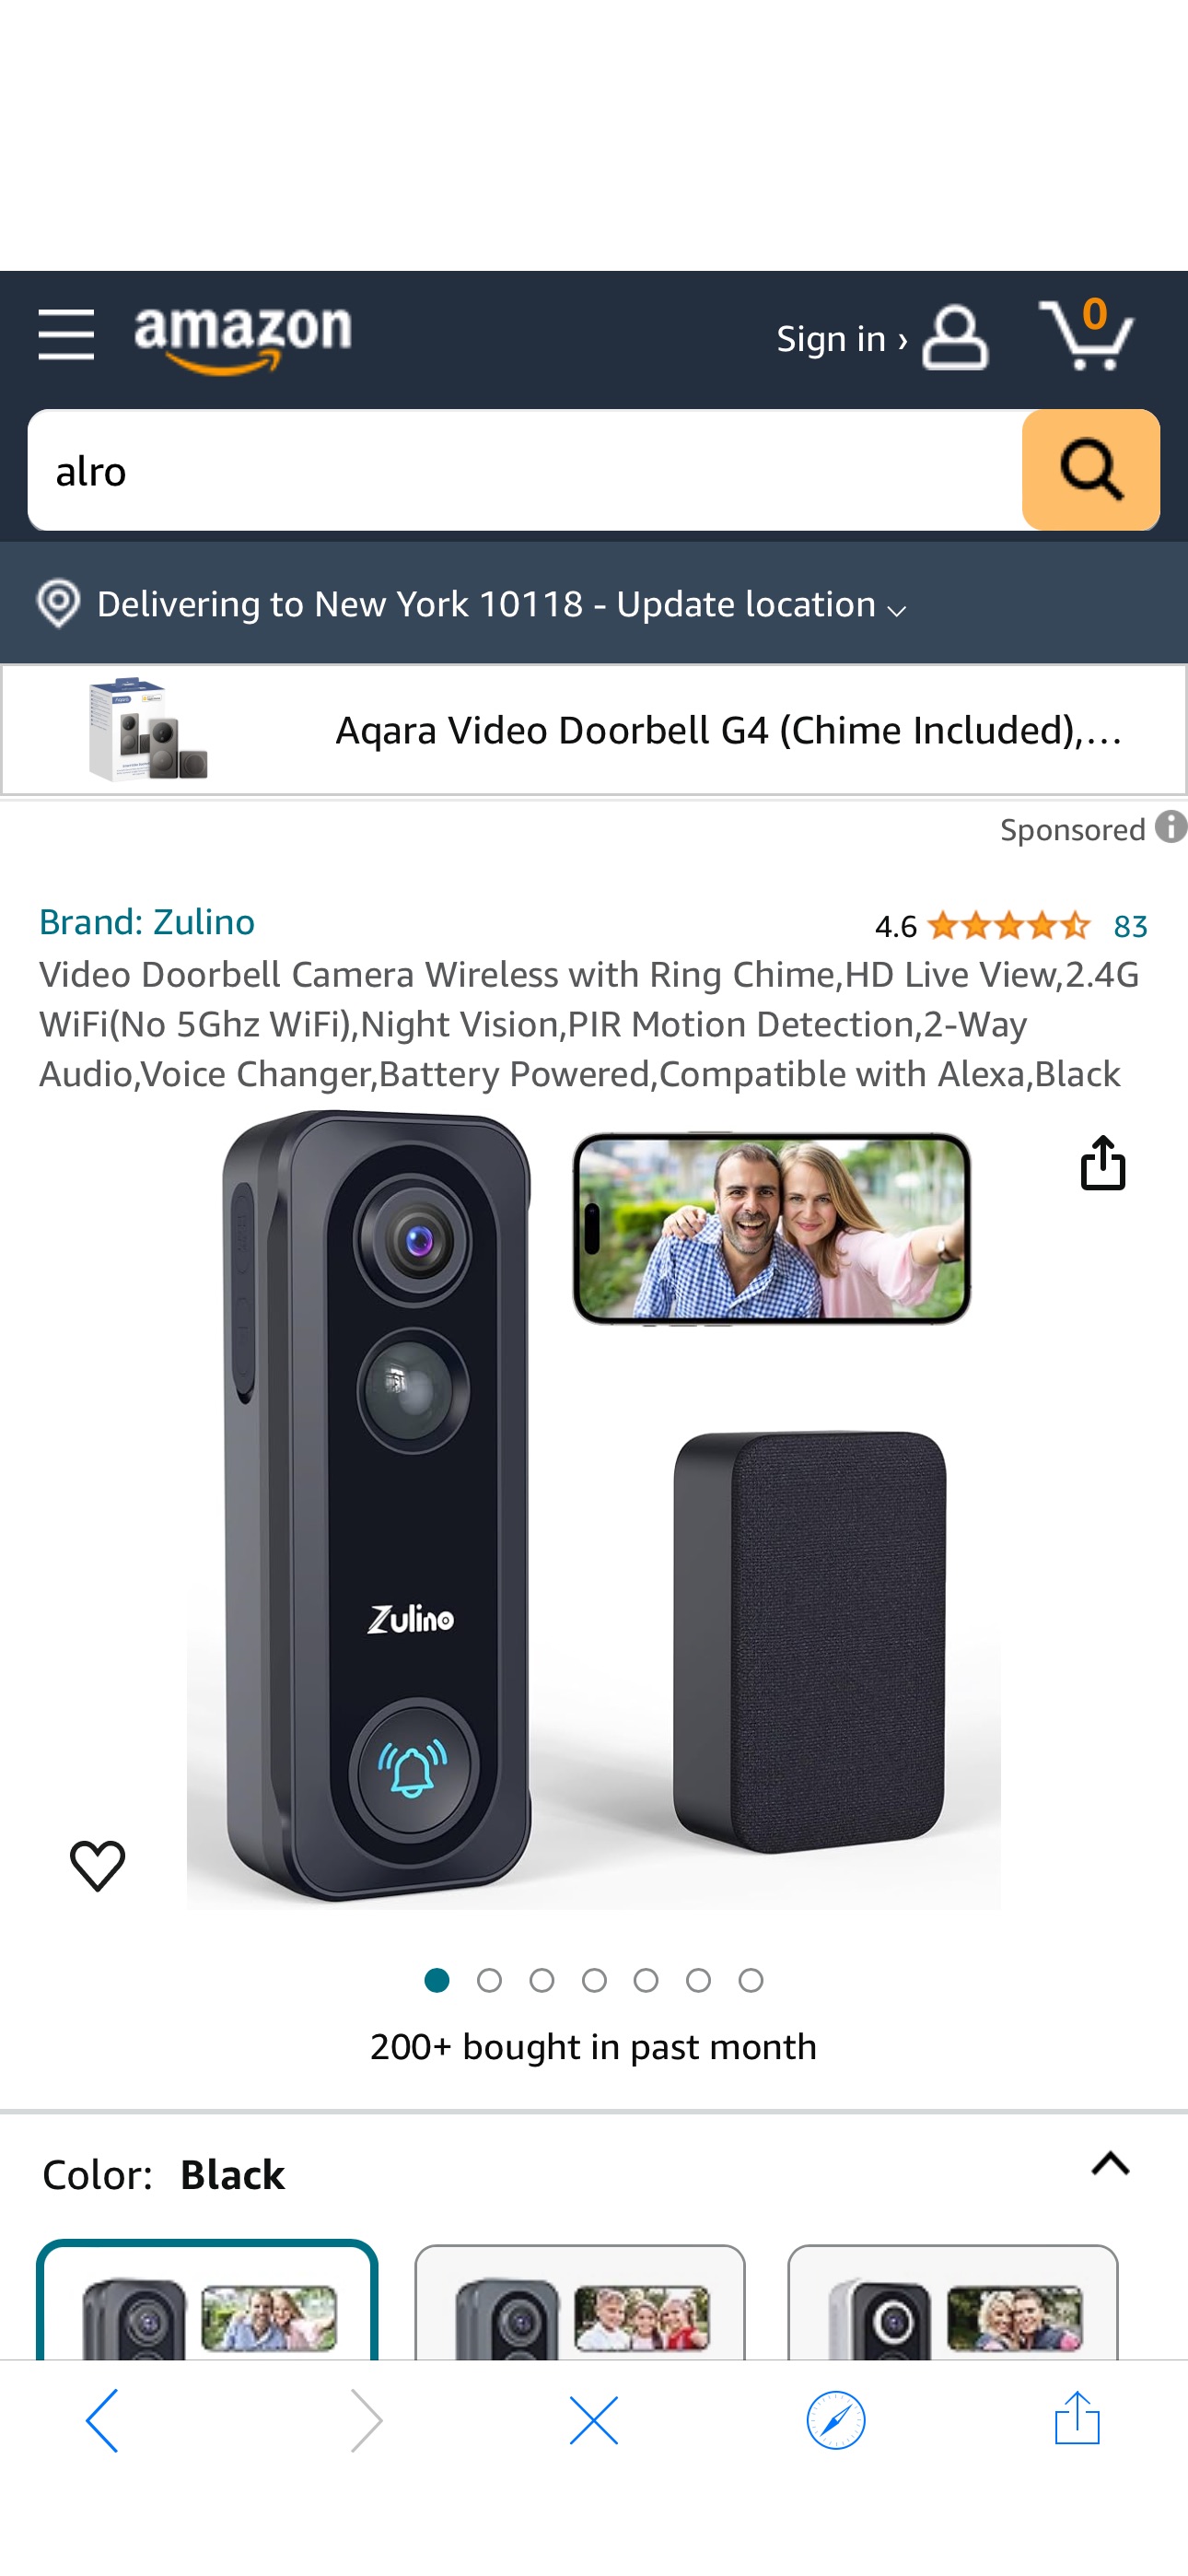 Amazon.com: Zulino Video Doorbell Camera Wireless with Ring Chime,HD Live View,2.4G WiFi(No 5Ghz WiFi),Night Vision,PIR Motion Detection,2-Way Audio,Voice Changer,Battery Powered,Compatible with Alexa